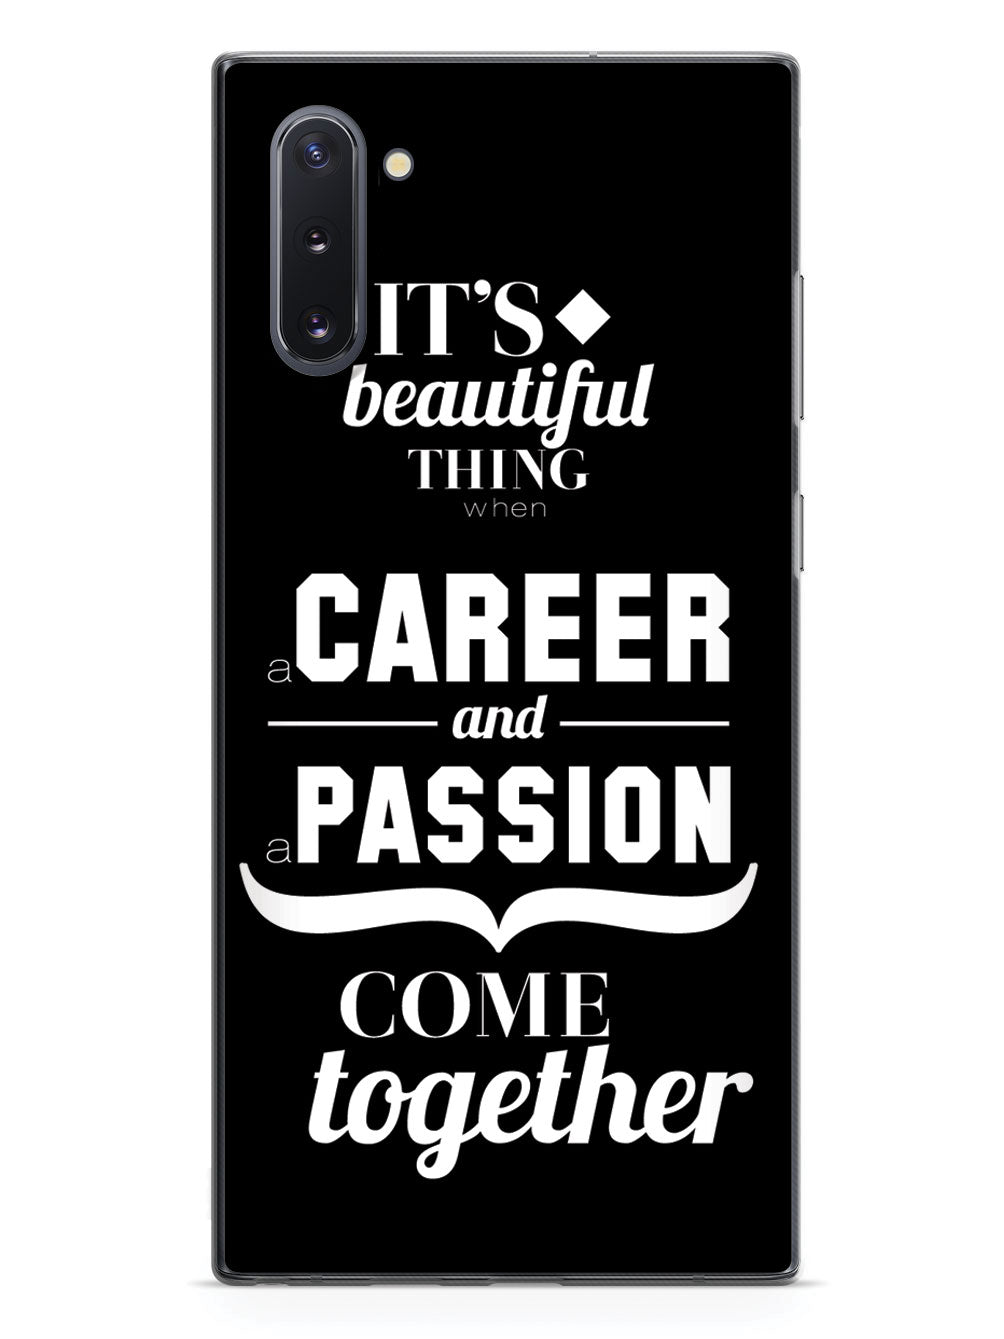 Career and Passion Come Together - Black Case